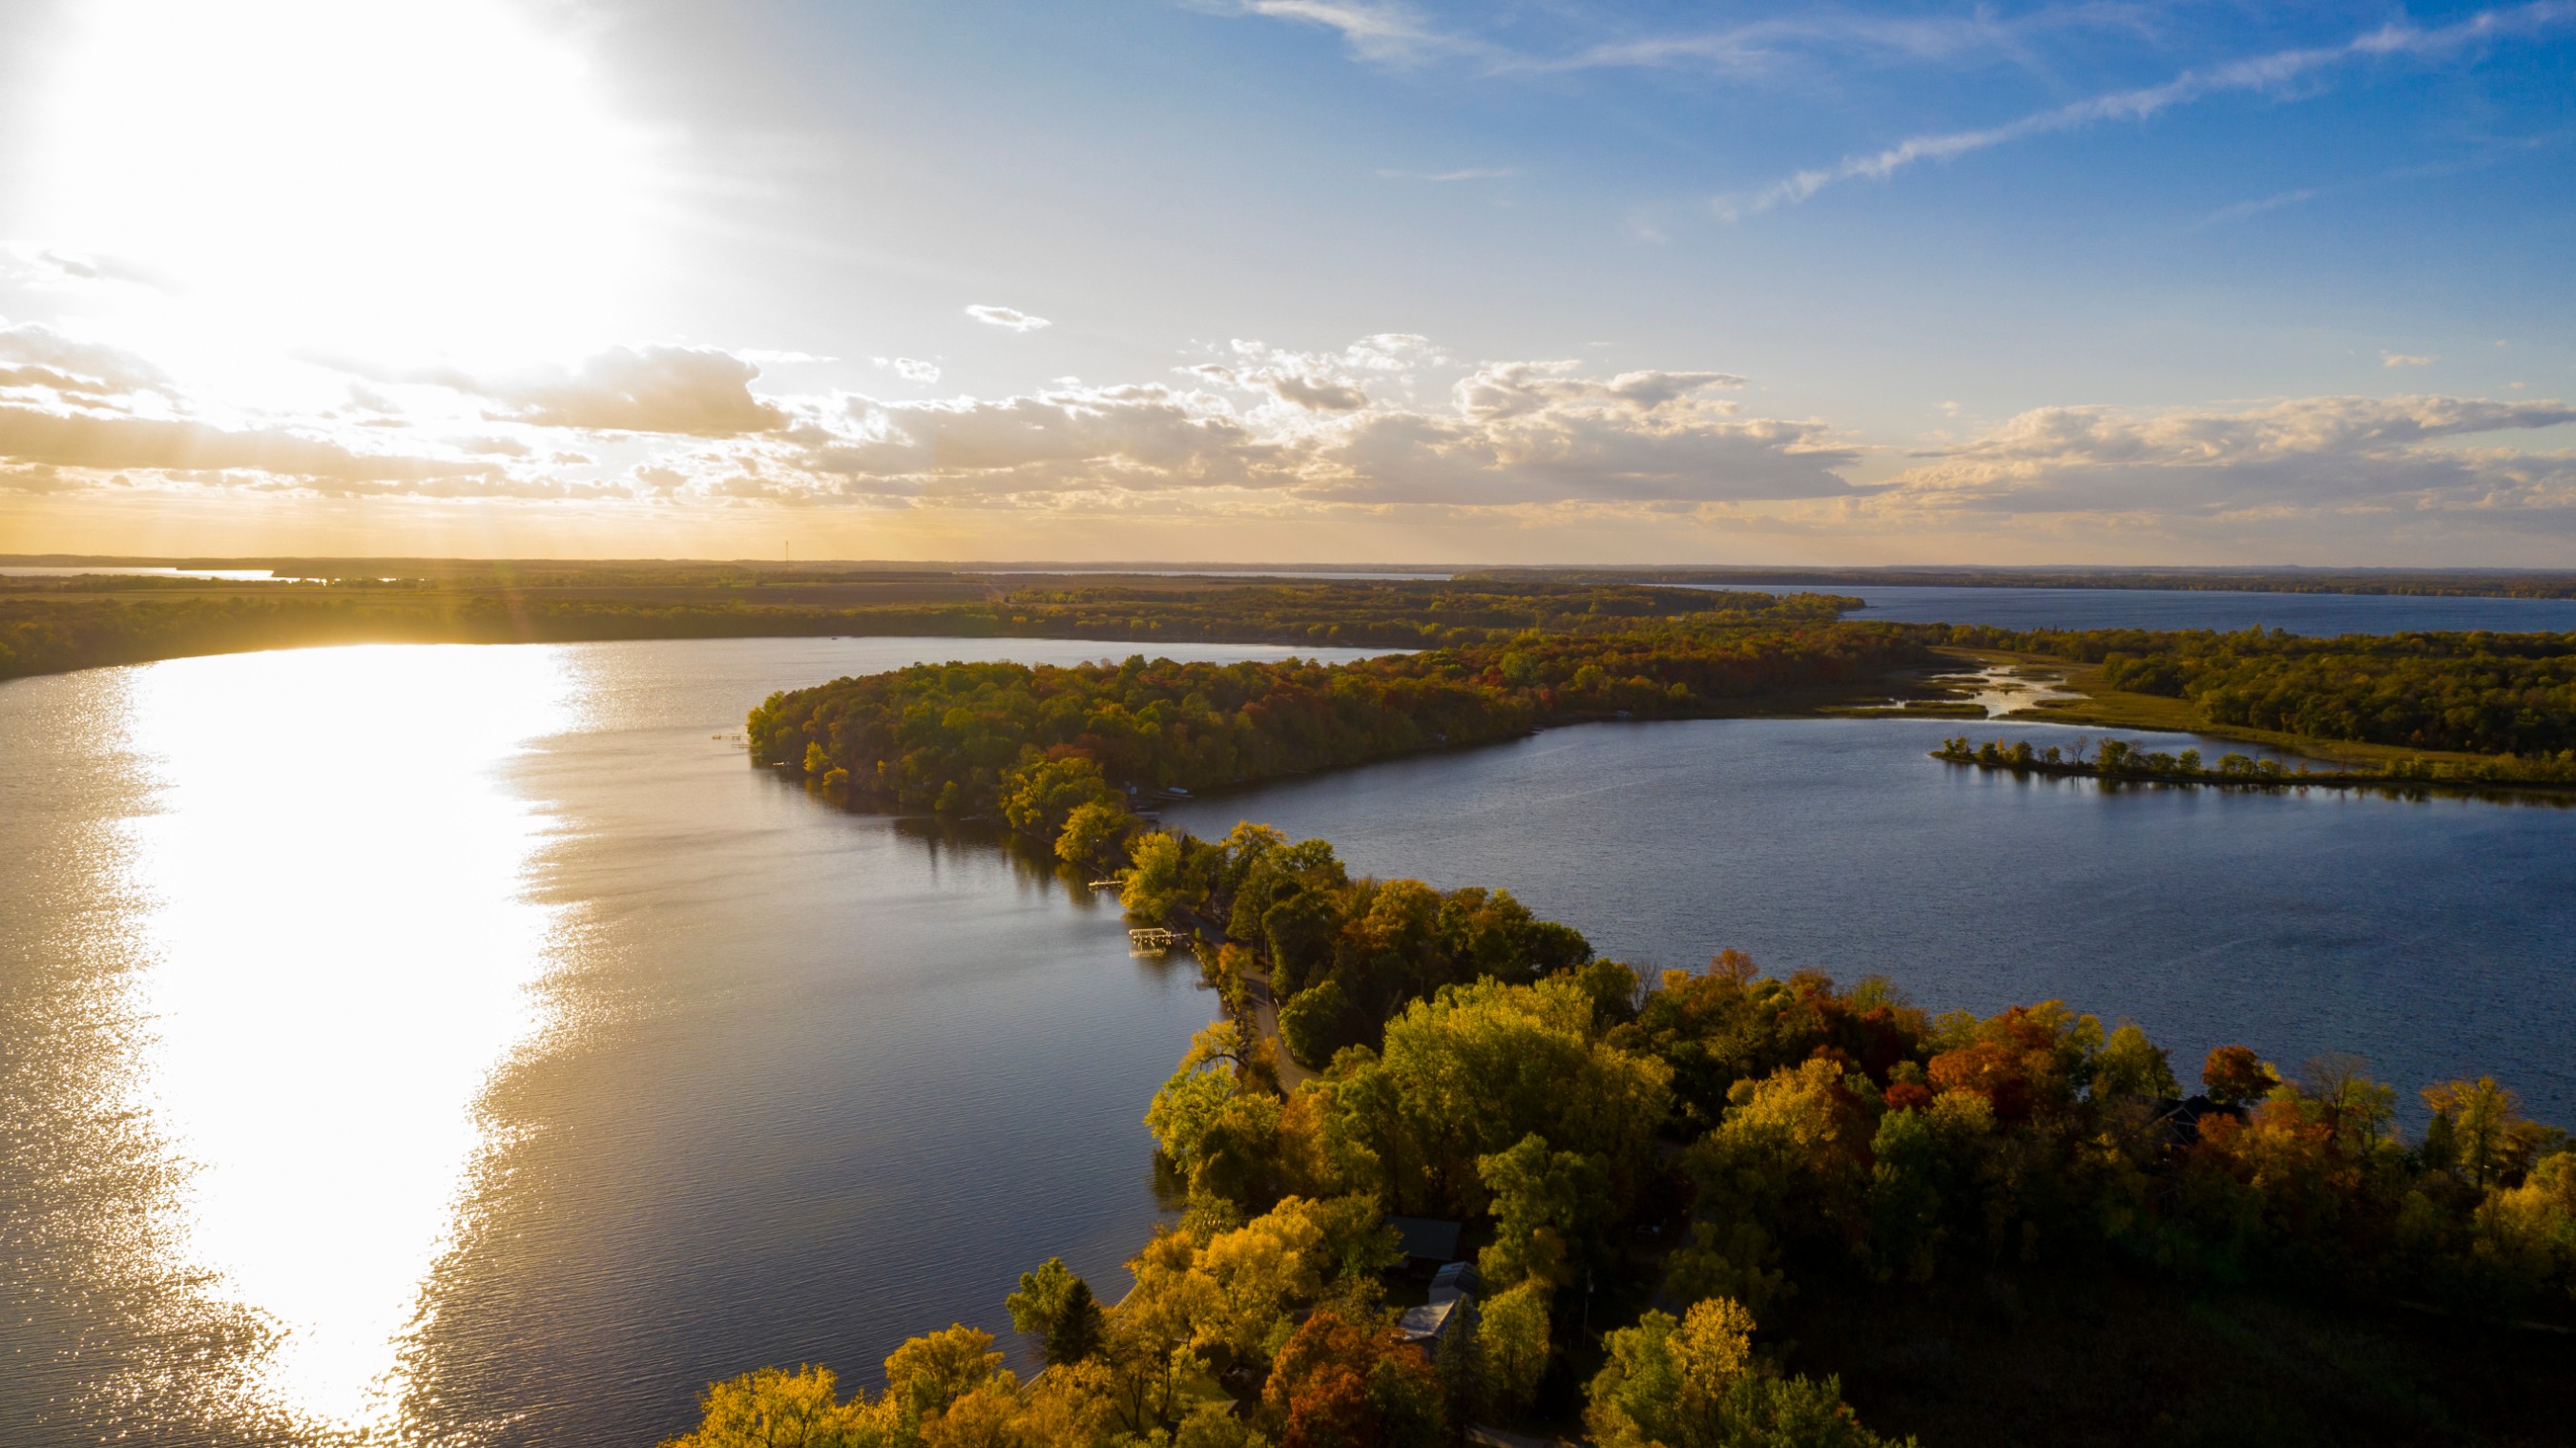 Land of 1,048 lakes. Otter Tail County has more lakes than any other county in the United States, 1,048 to be exact. Just one of the many reasons folks choose to live, work & play there.